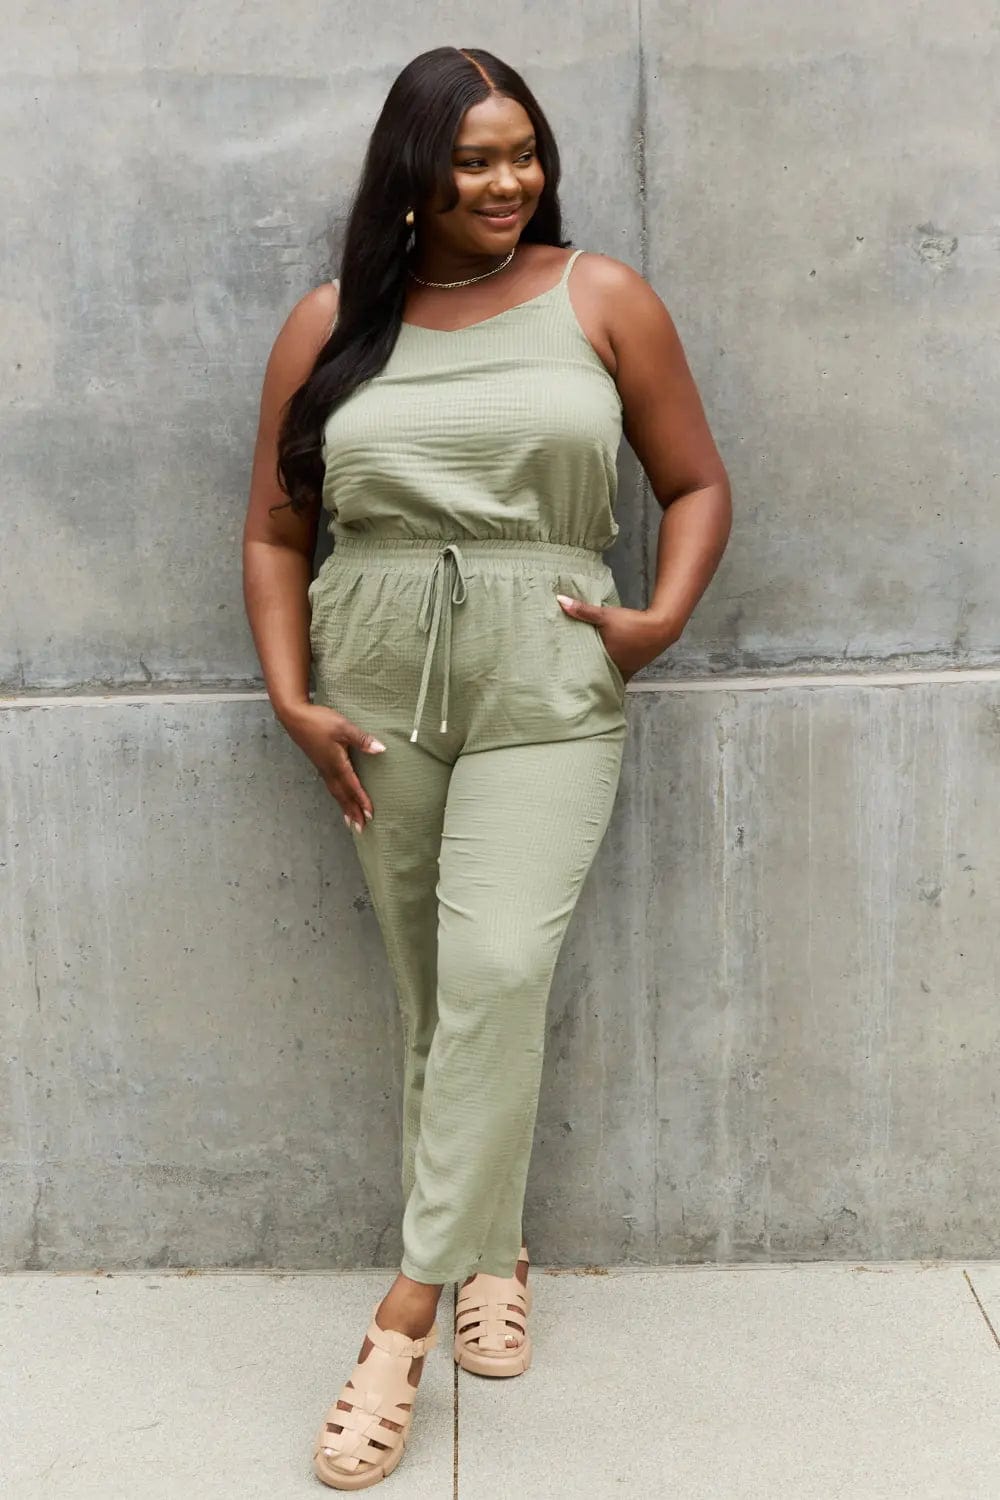 ODDI Full Size Textured Woven Jumpsuit in Sage  55.00 MPGD Corp Merchandise